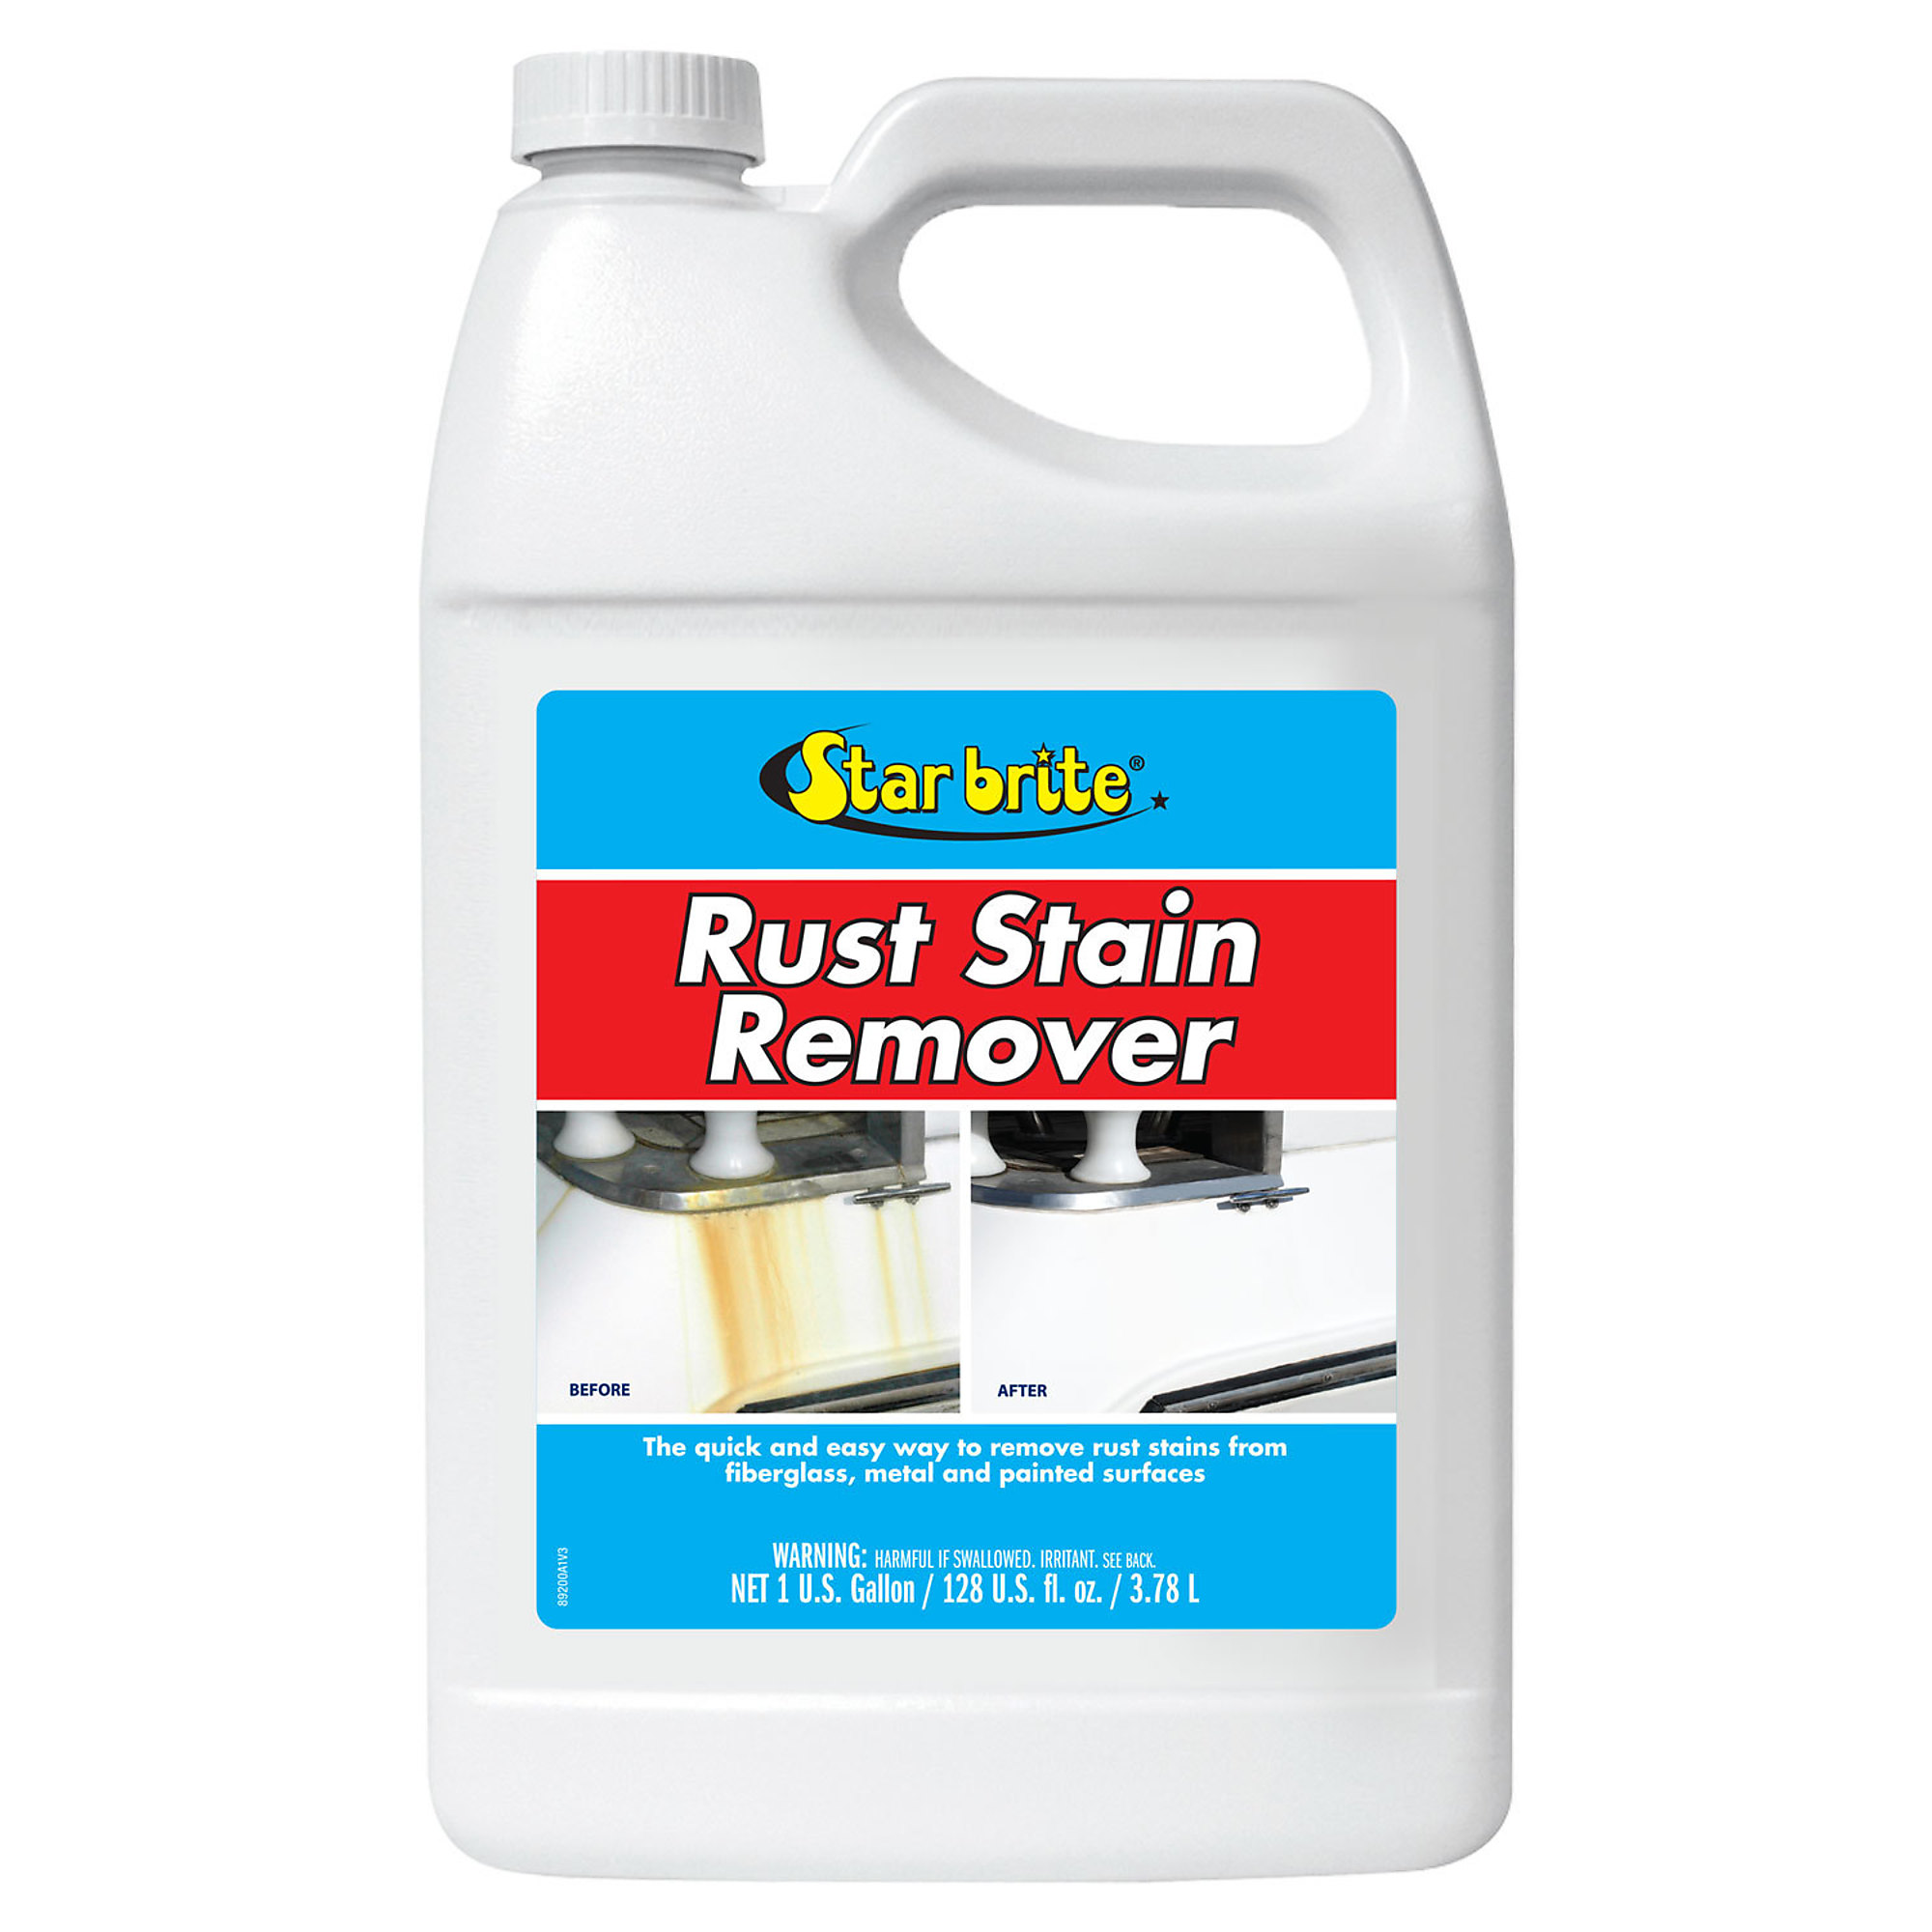 StarBrite, Rust Stain Remover Gal, Included (qty.) 1, Model 089200N